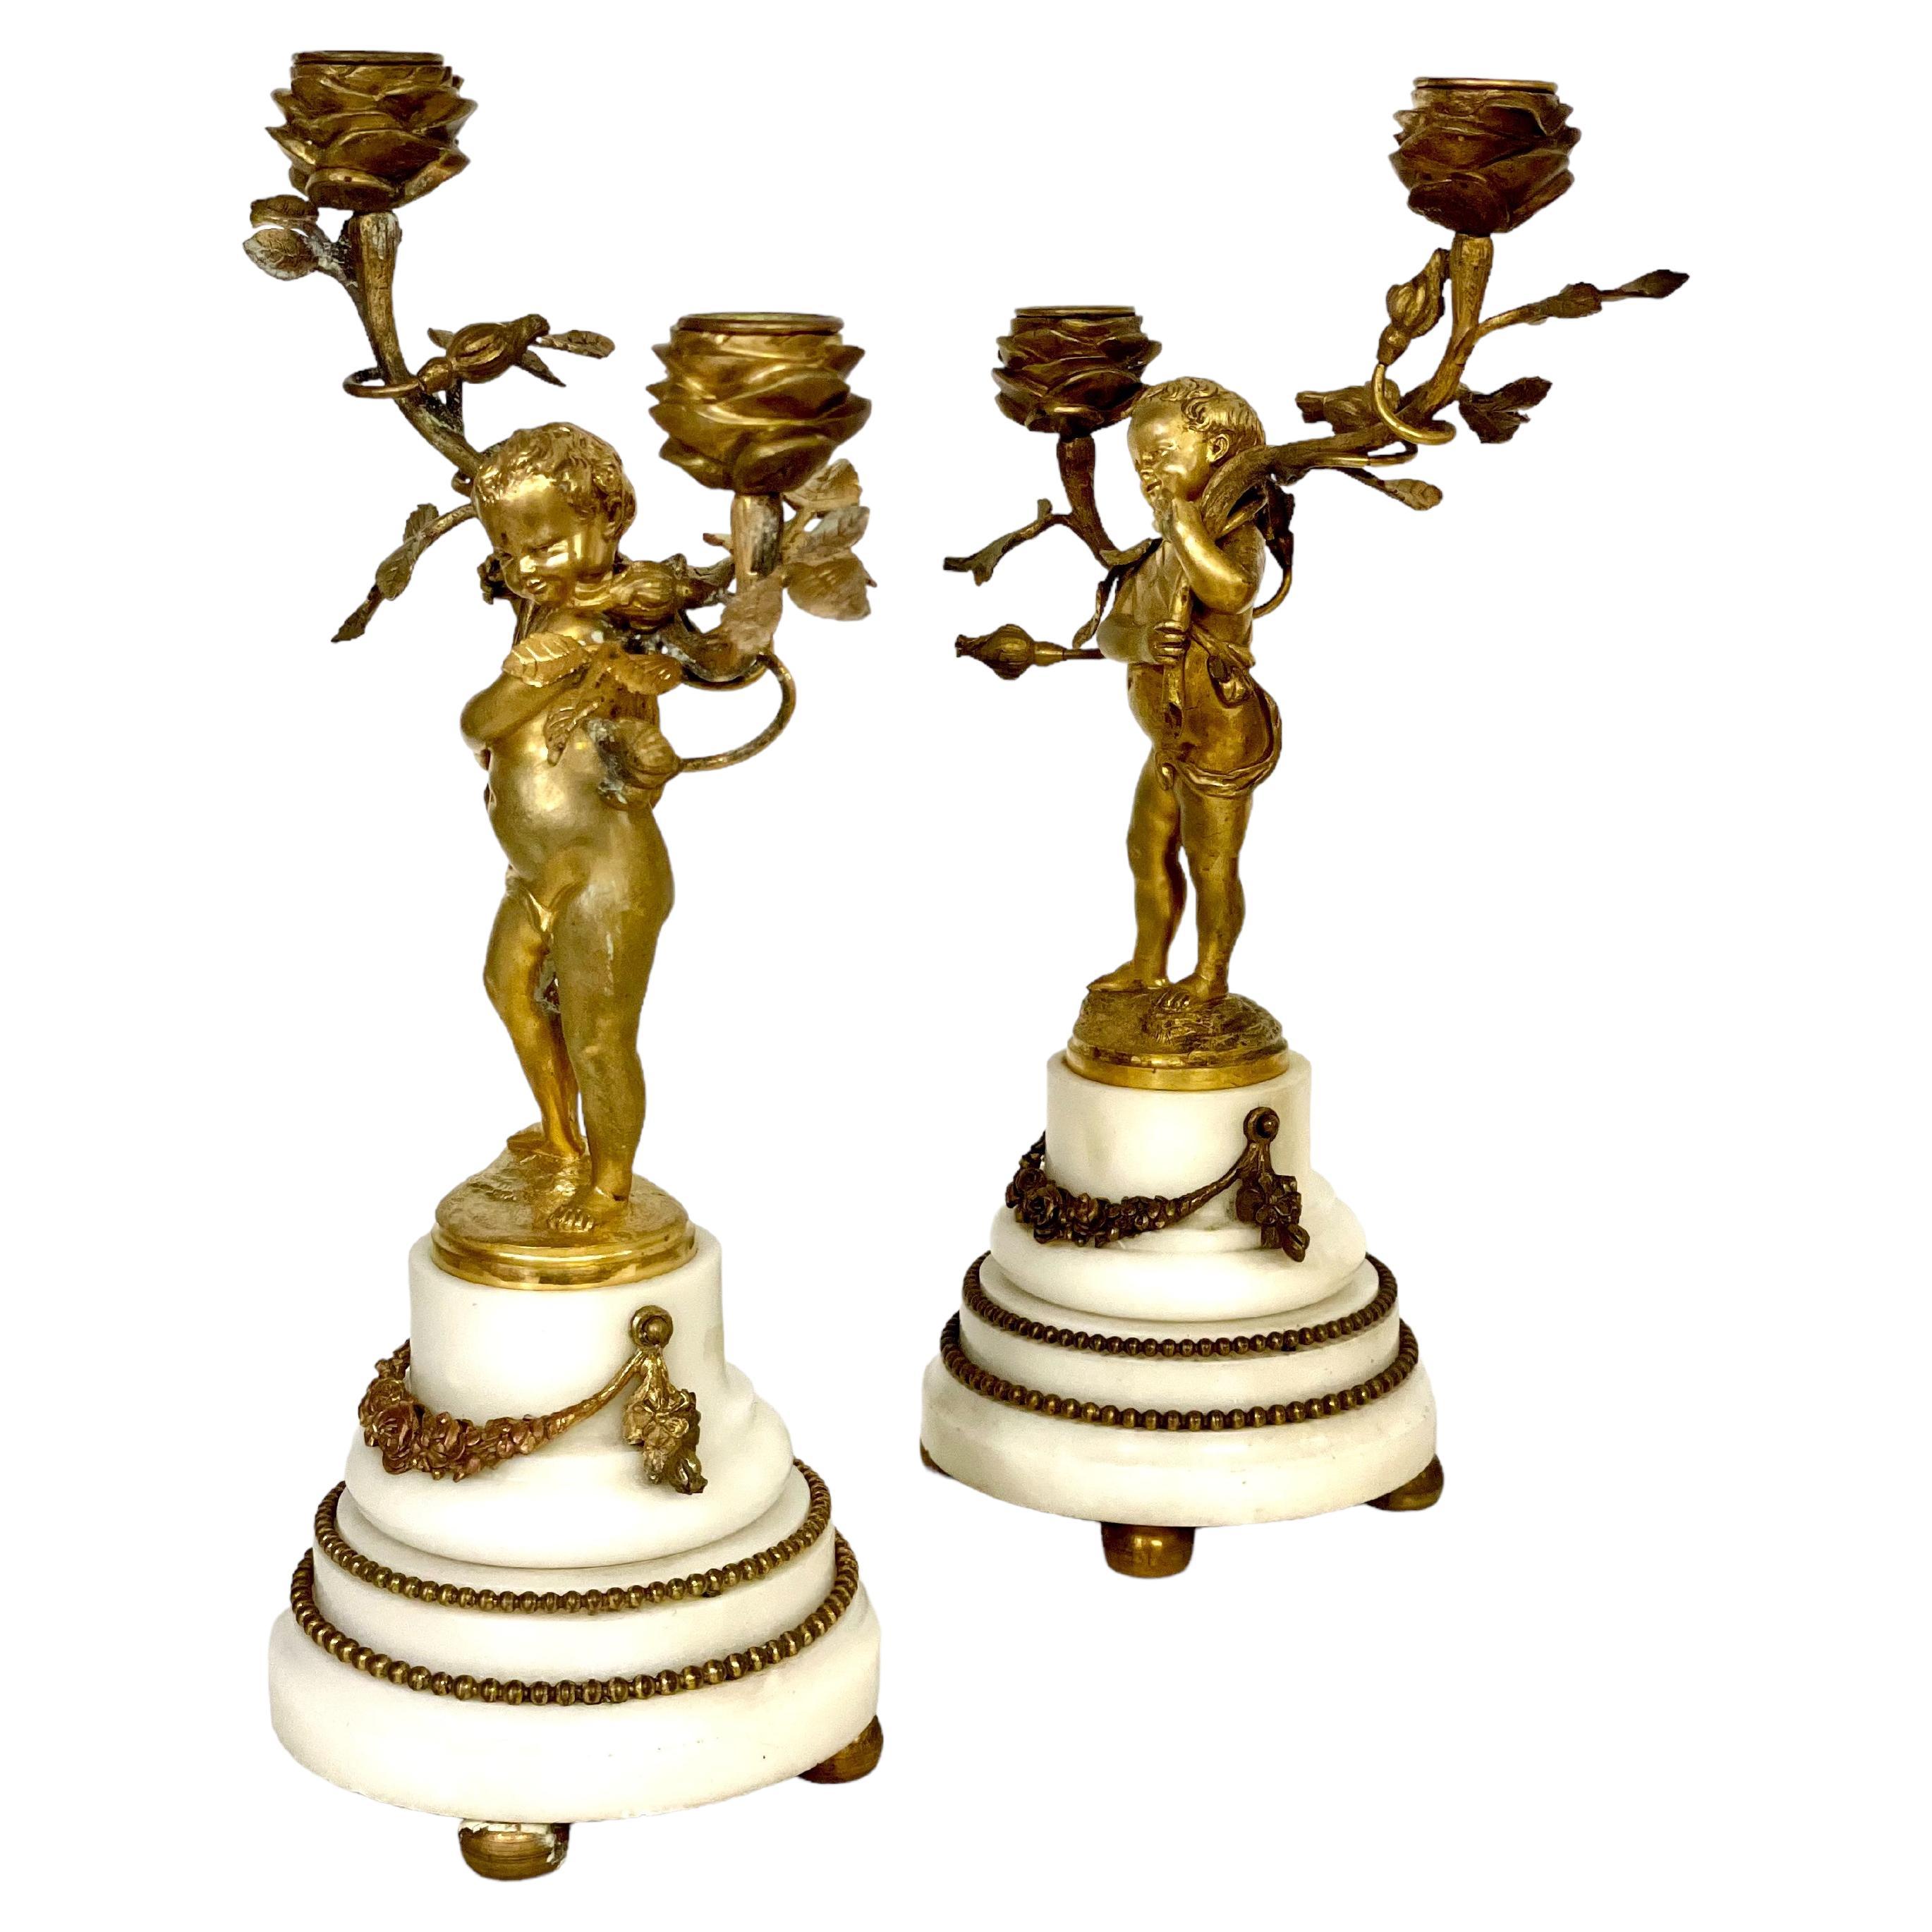 A fabulous pair of complementary 19th century gilt bronze and white marble two-branch candelabra, crafted in the Louis XVI style. Each of these ornate candle holders takes the form of a barely veiled golden putto holding aloft branches of billowing